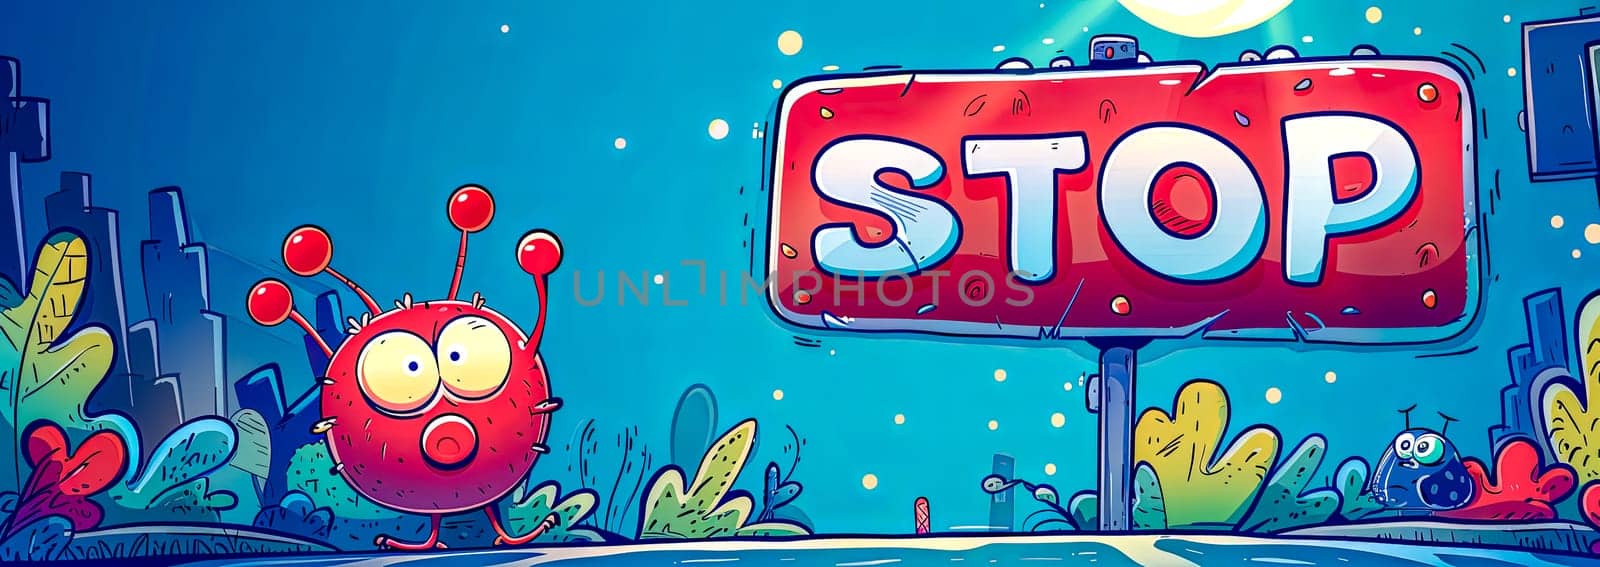 Illustration of a surprised alien at a stop sign with cityscape background under moonlight